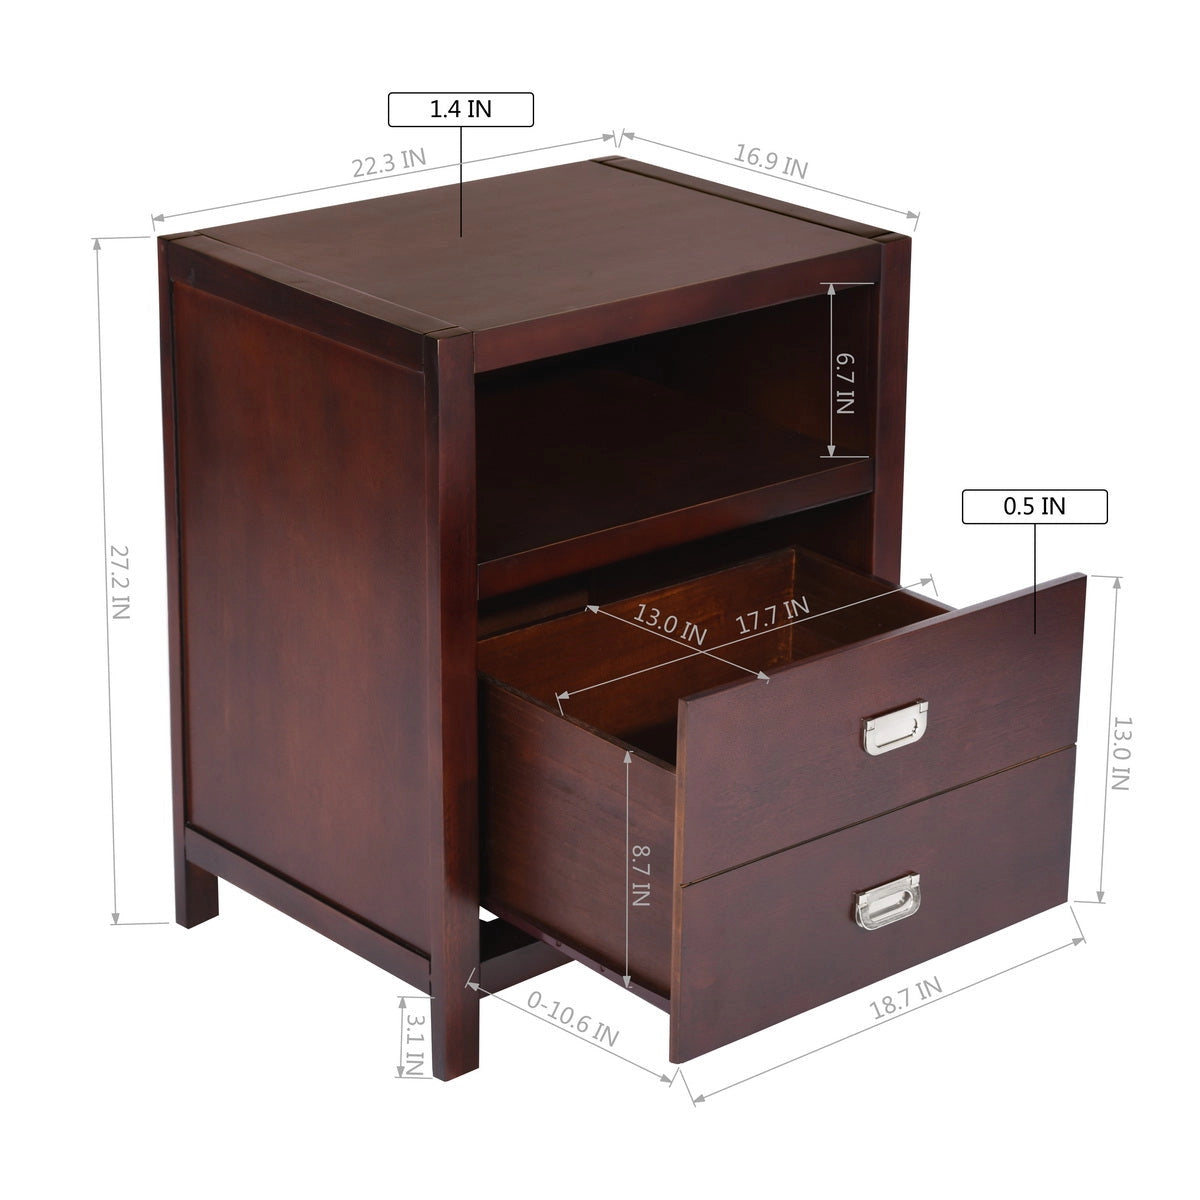 Brown Single Drawer Nightstand, Side Table - New